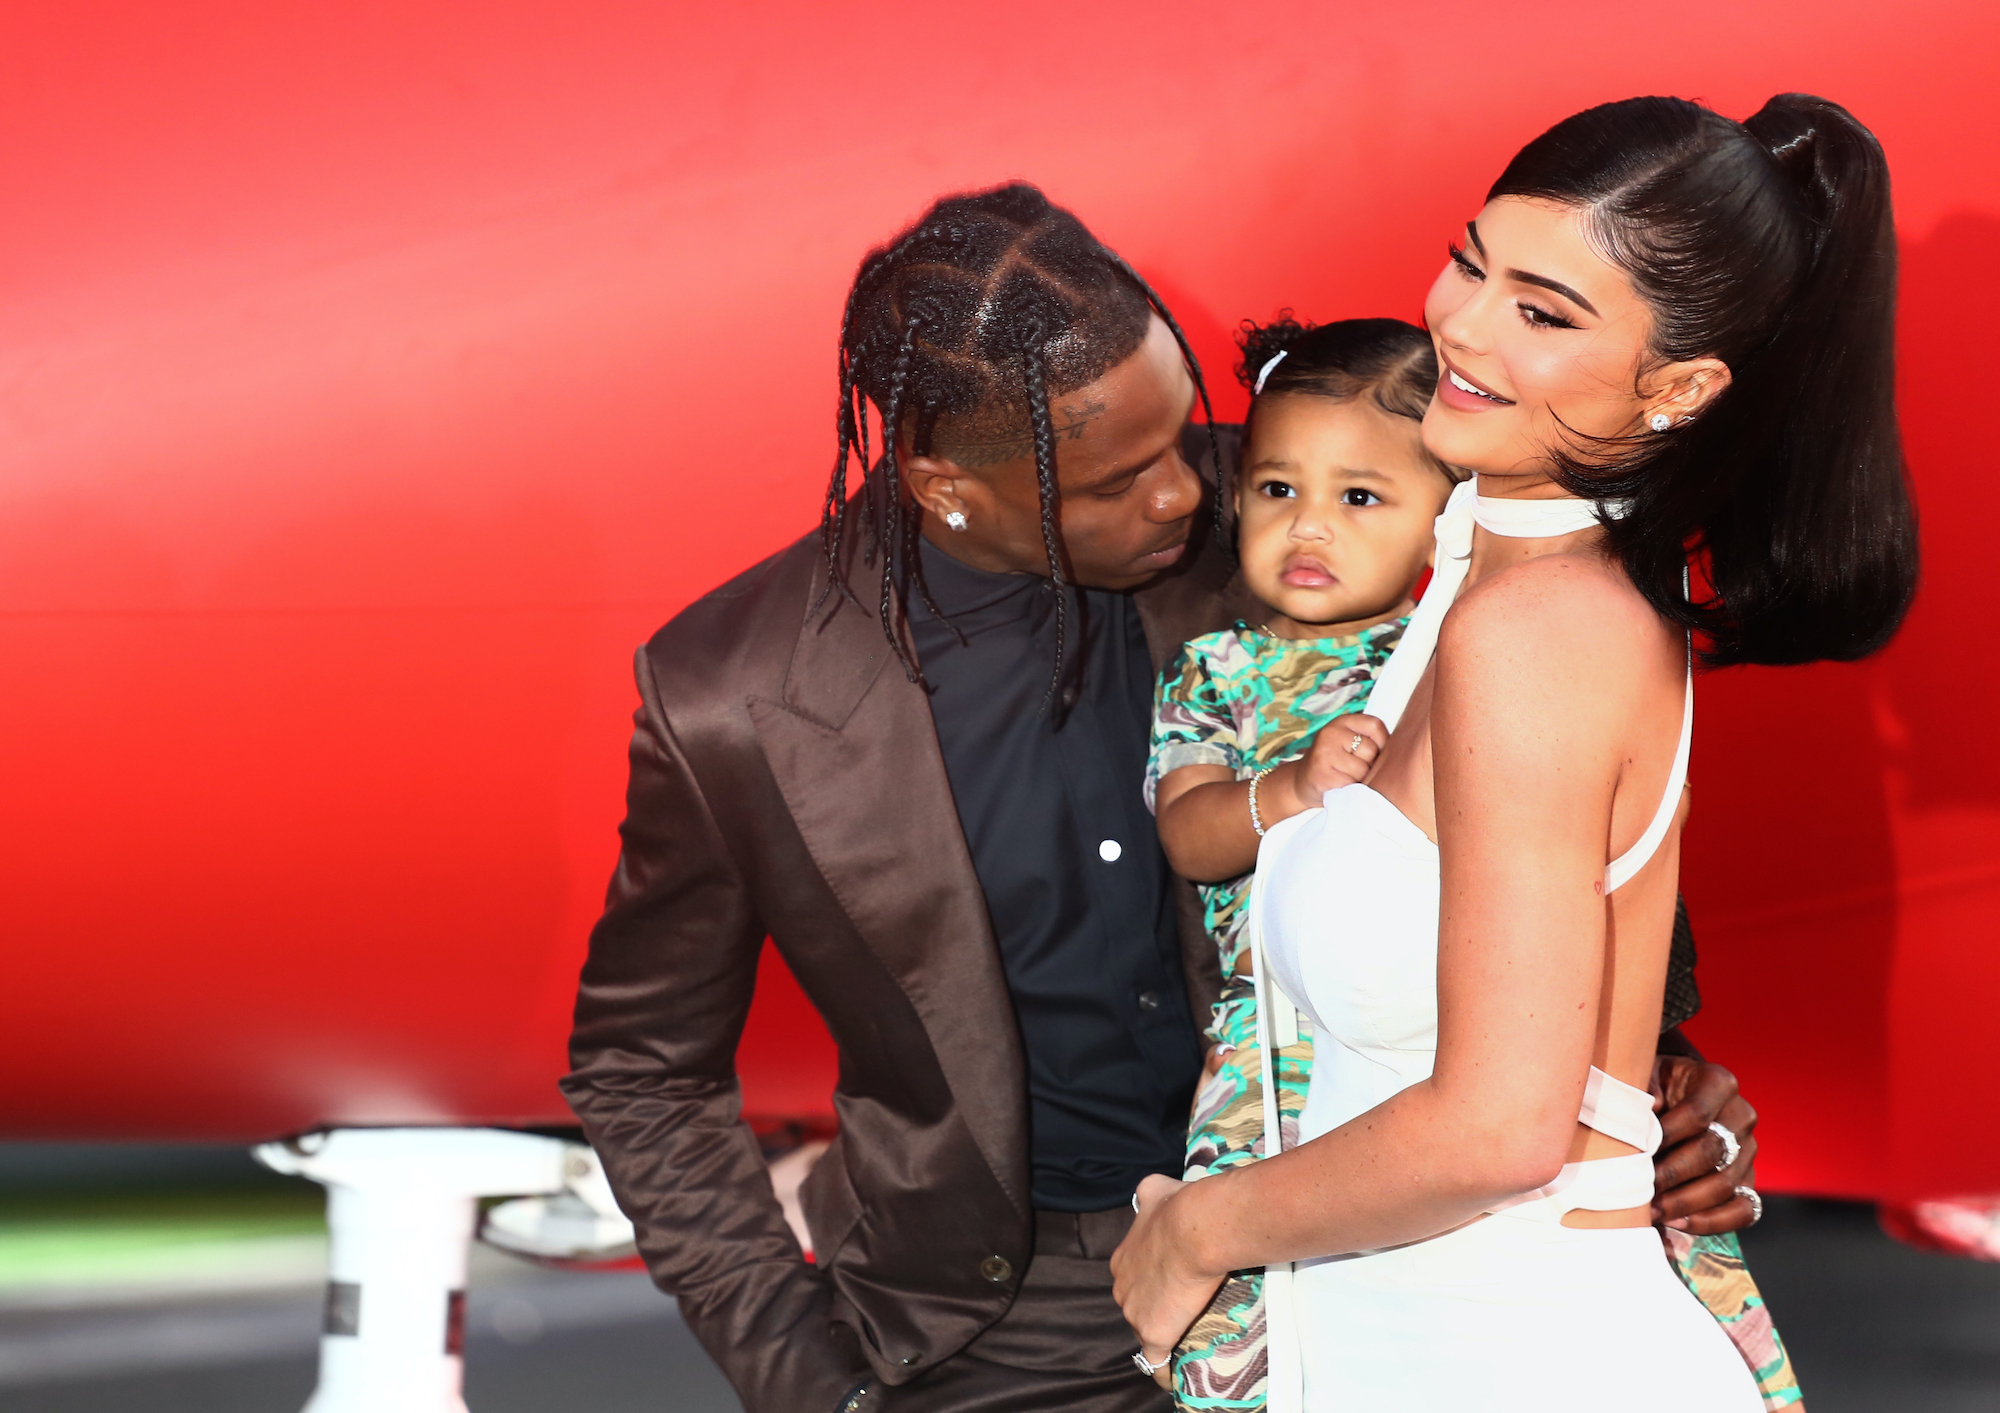 Travis Scott and Kylie Jenner attend premiere of 'Travis Scott: Look Mom I Can Fly' with their daughter, Stormi Webster, in 2019